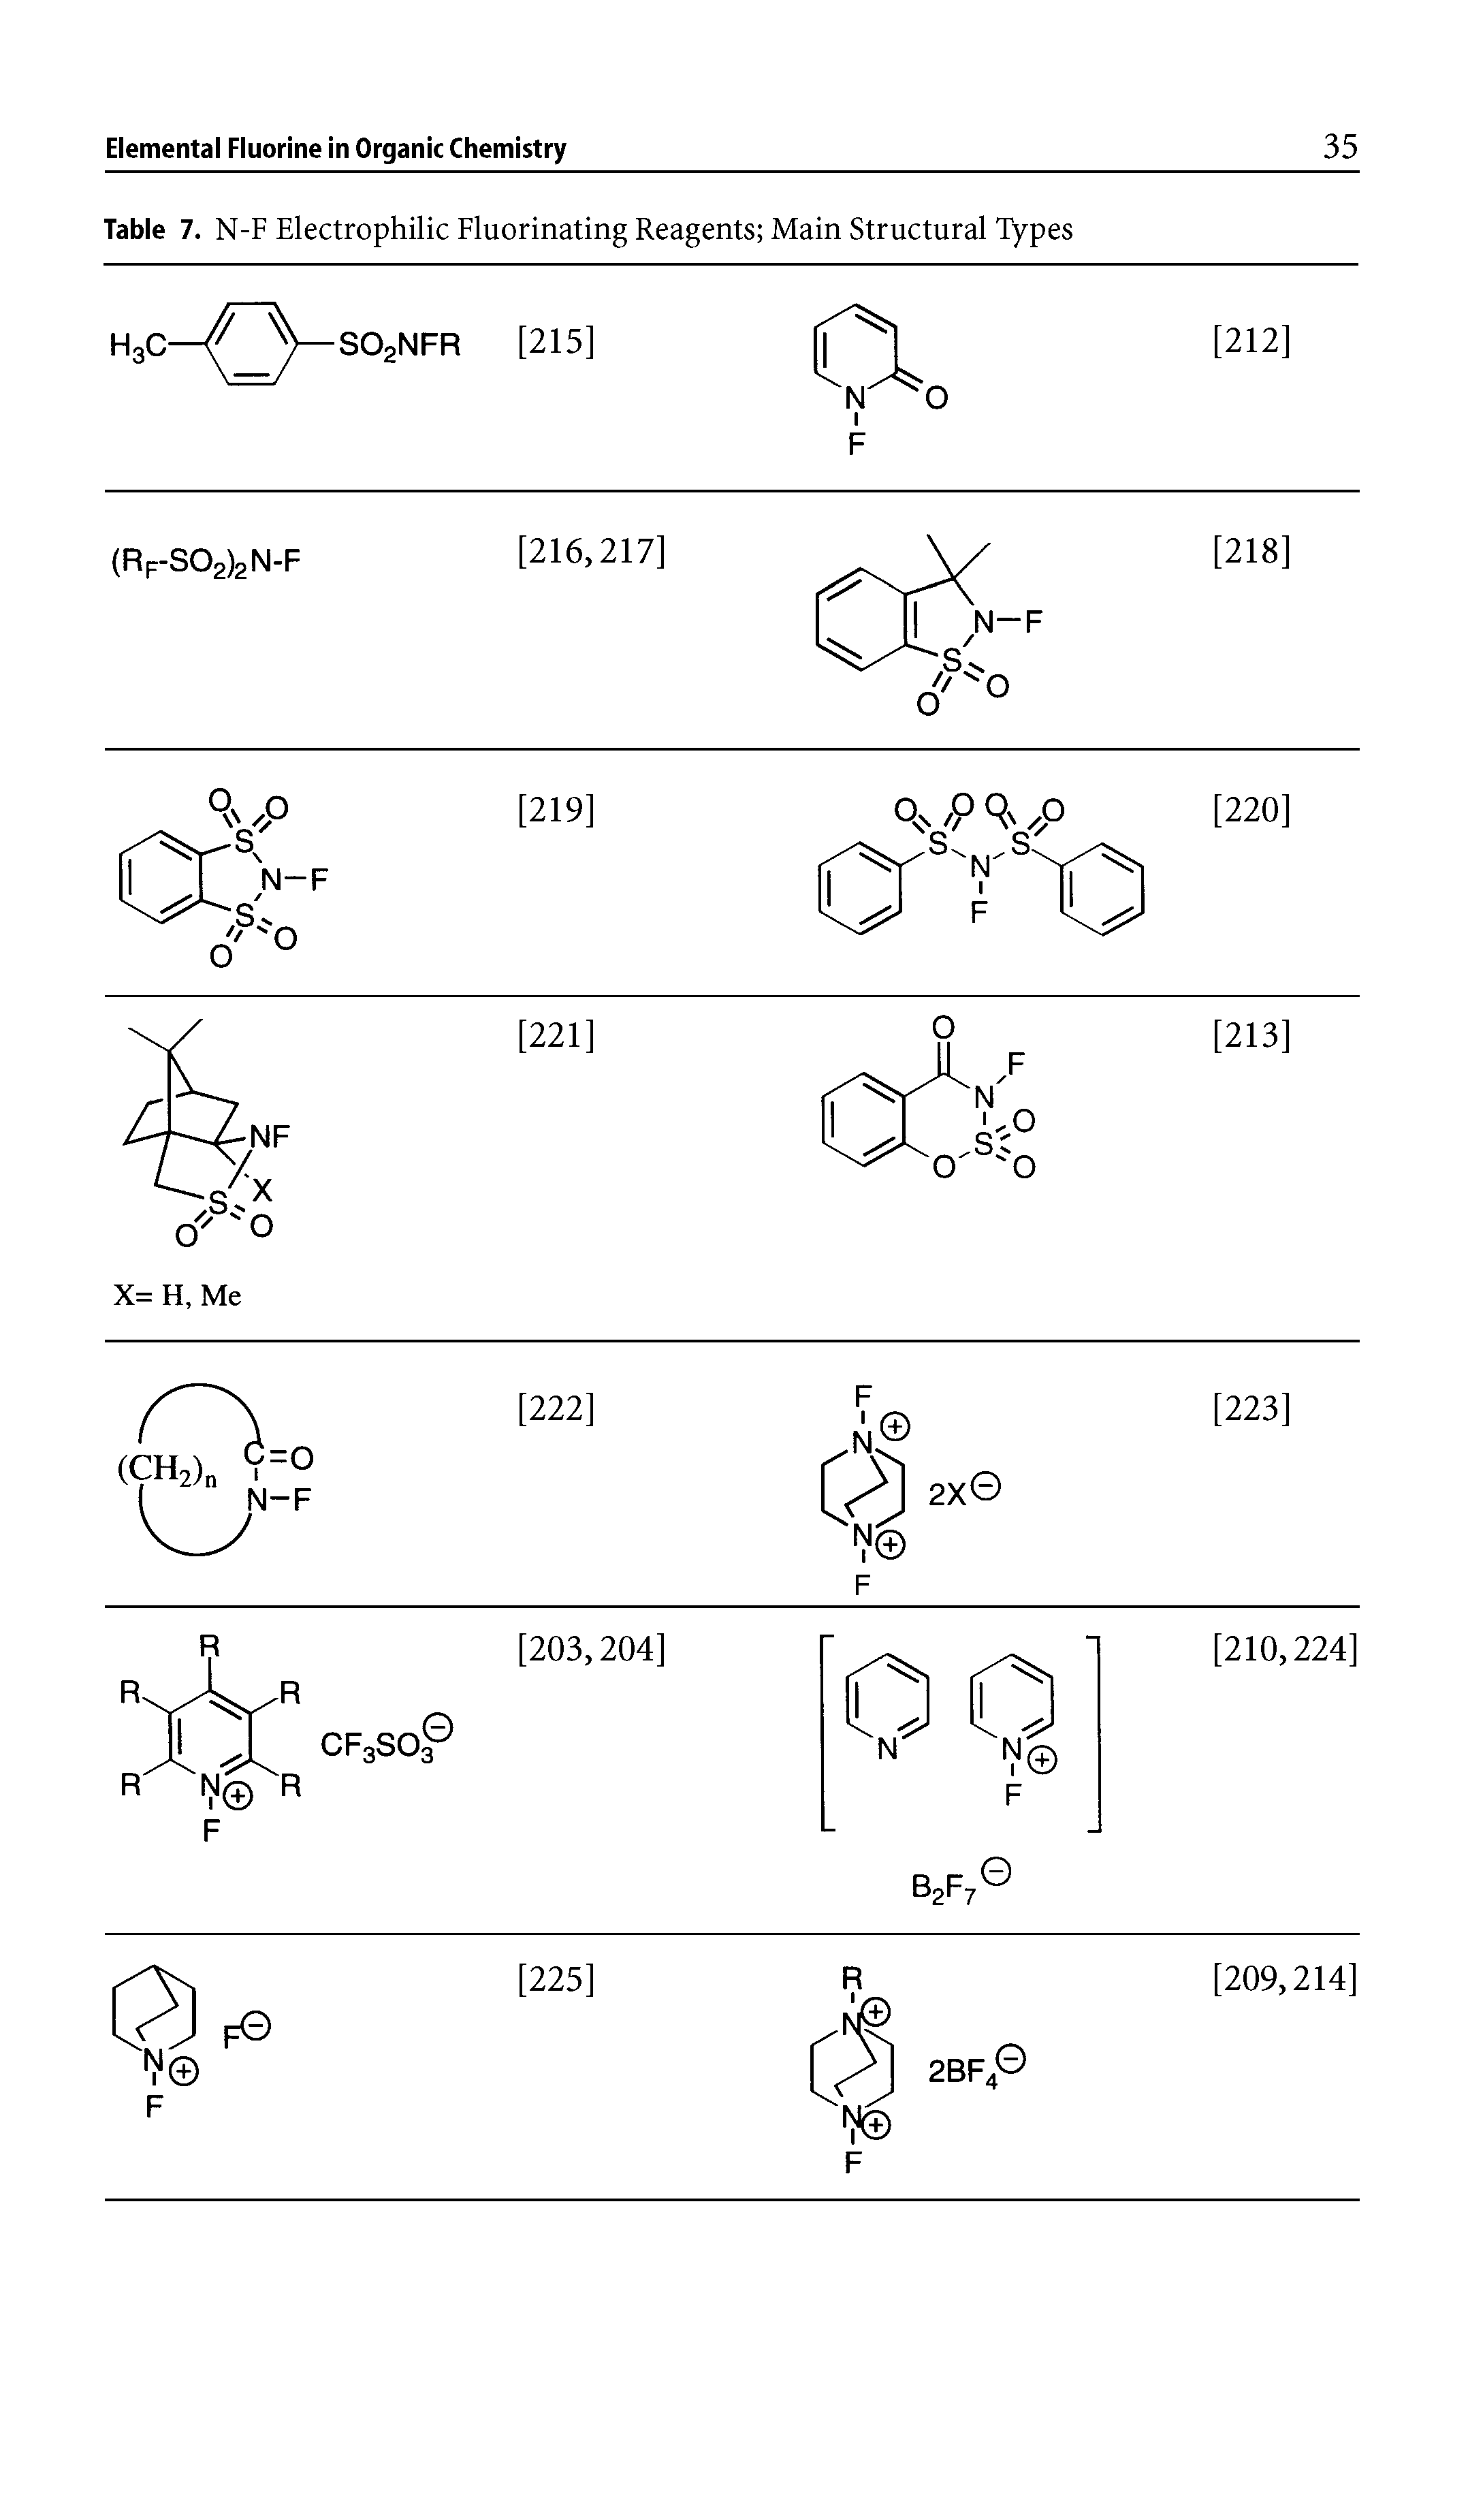 Table 7. N-F Electrophilic Fluorinating Reagents Main Structural Types...